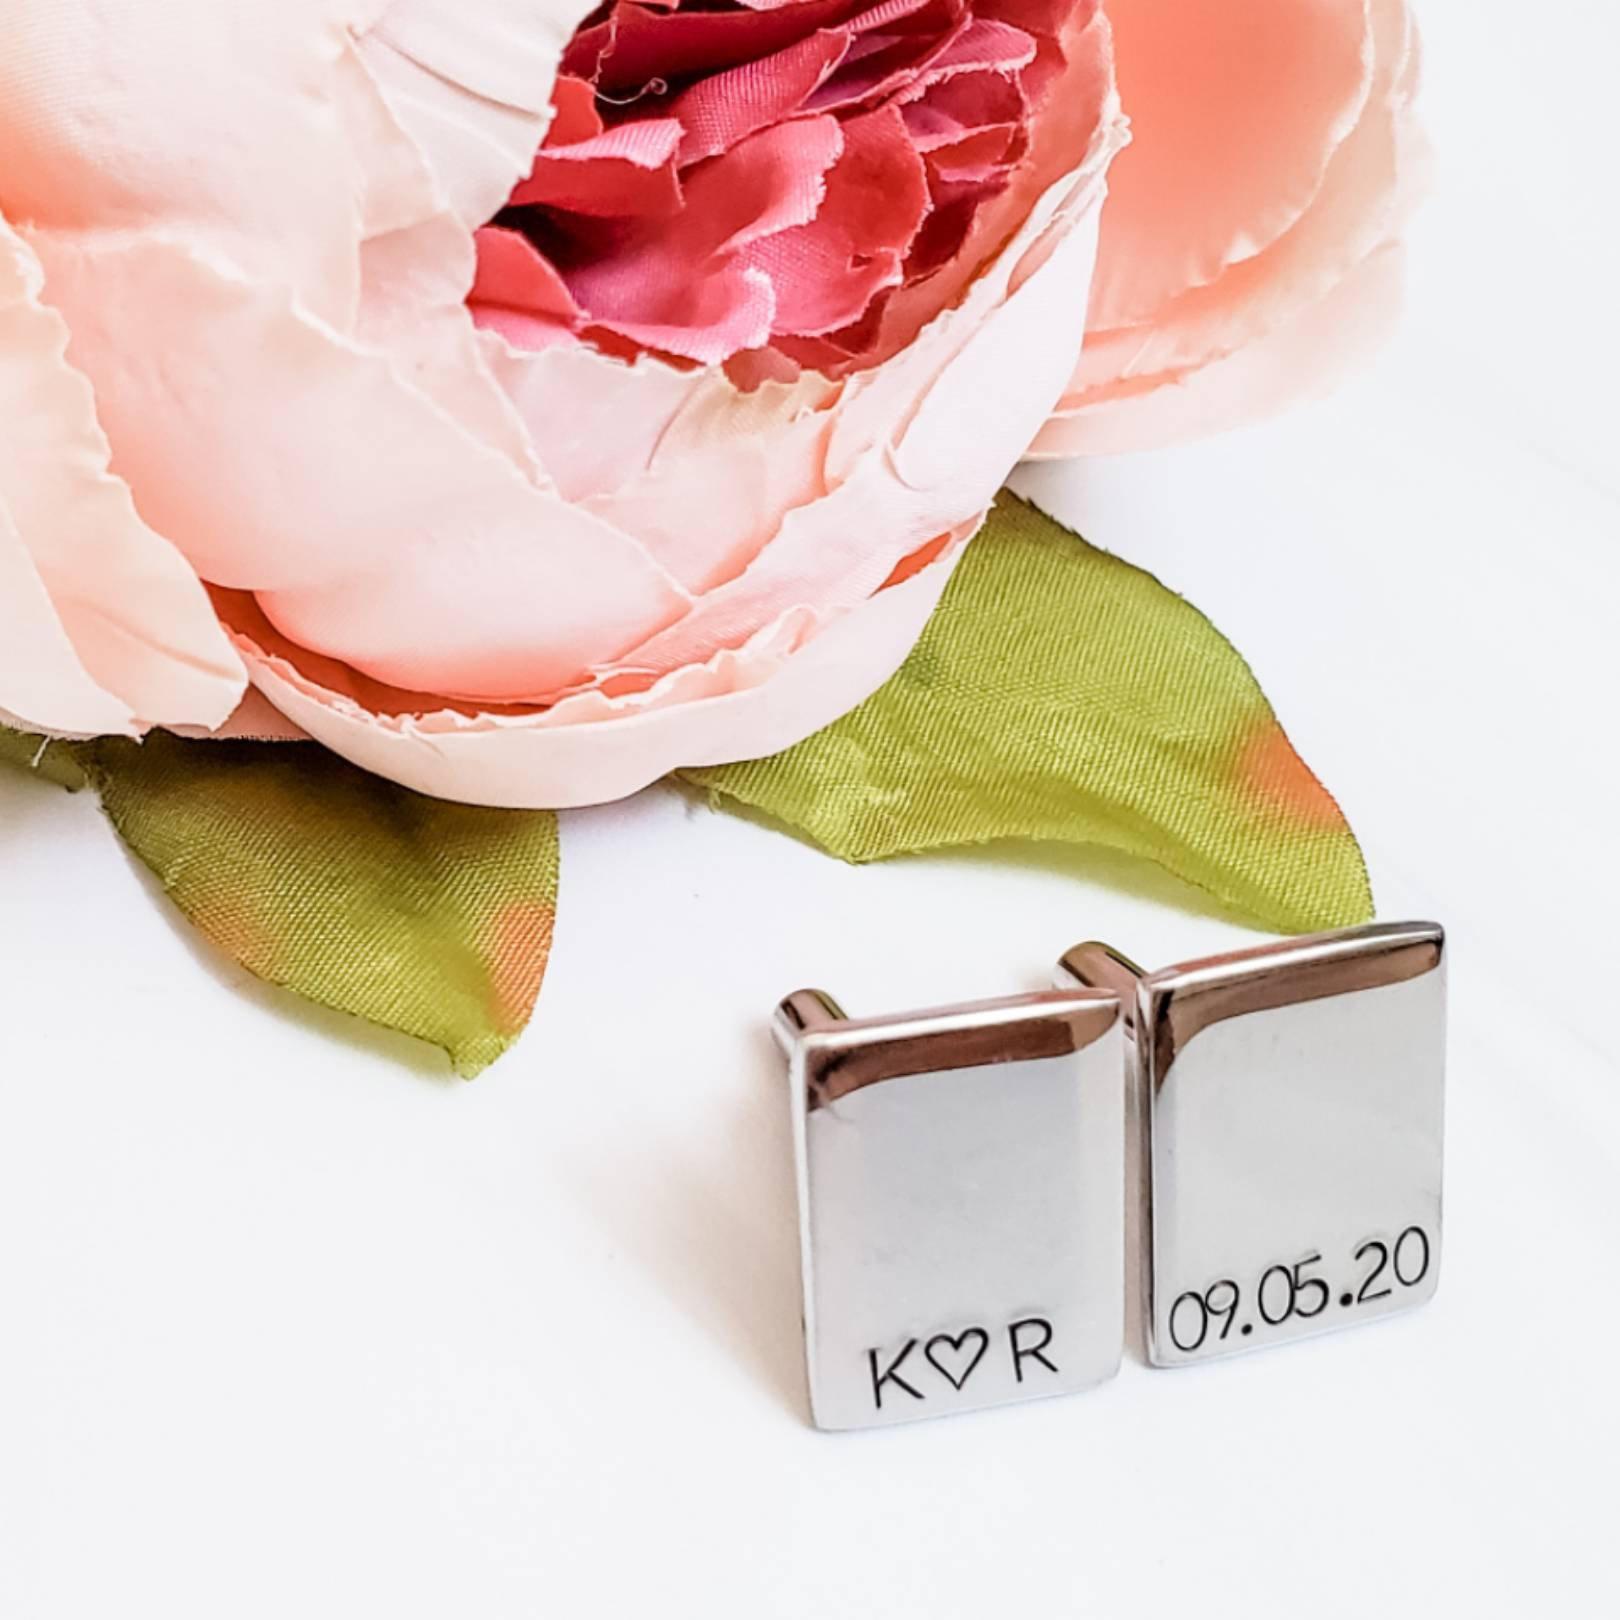 Personalized Silver Rectangular Cuff Links Salt and Sparkle